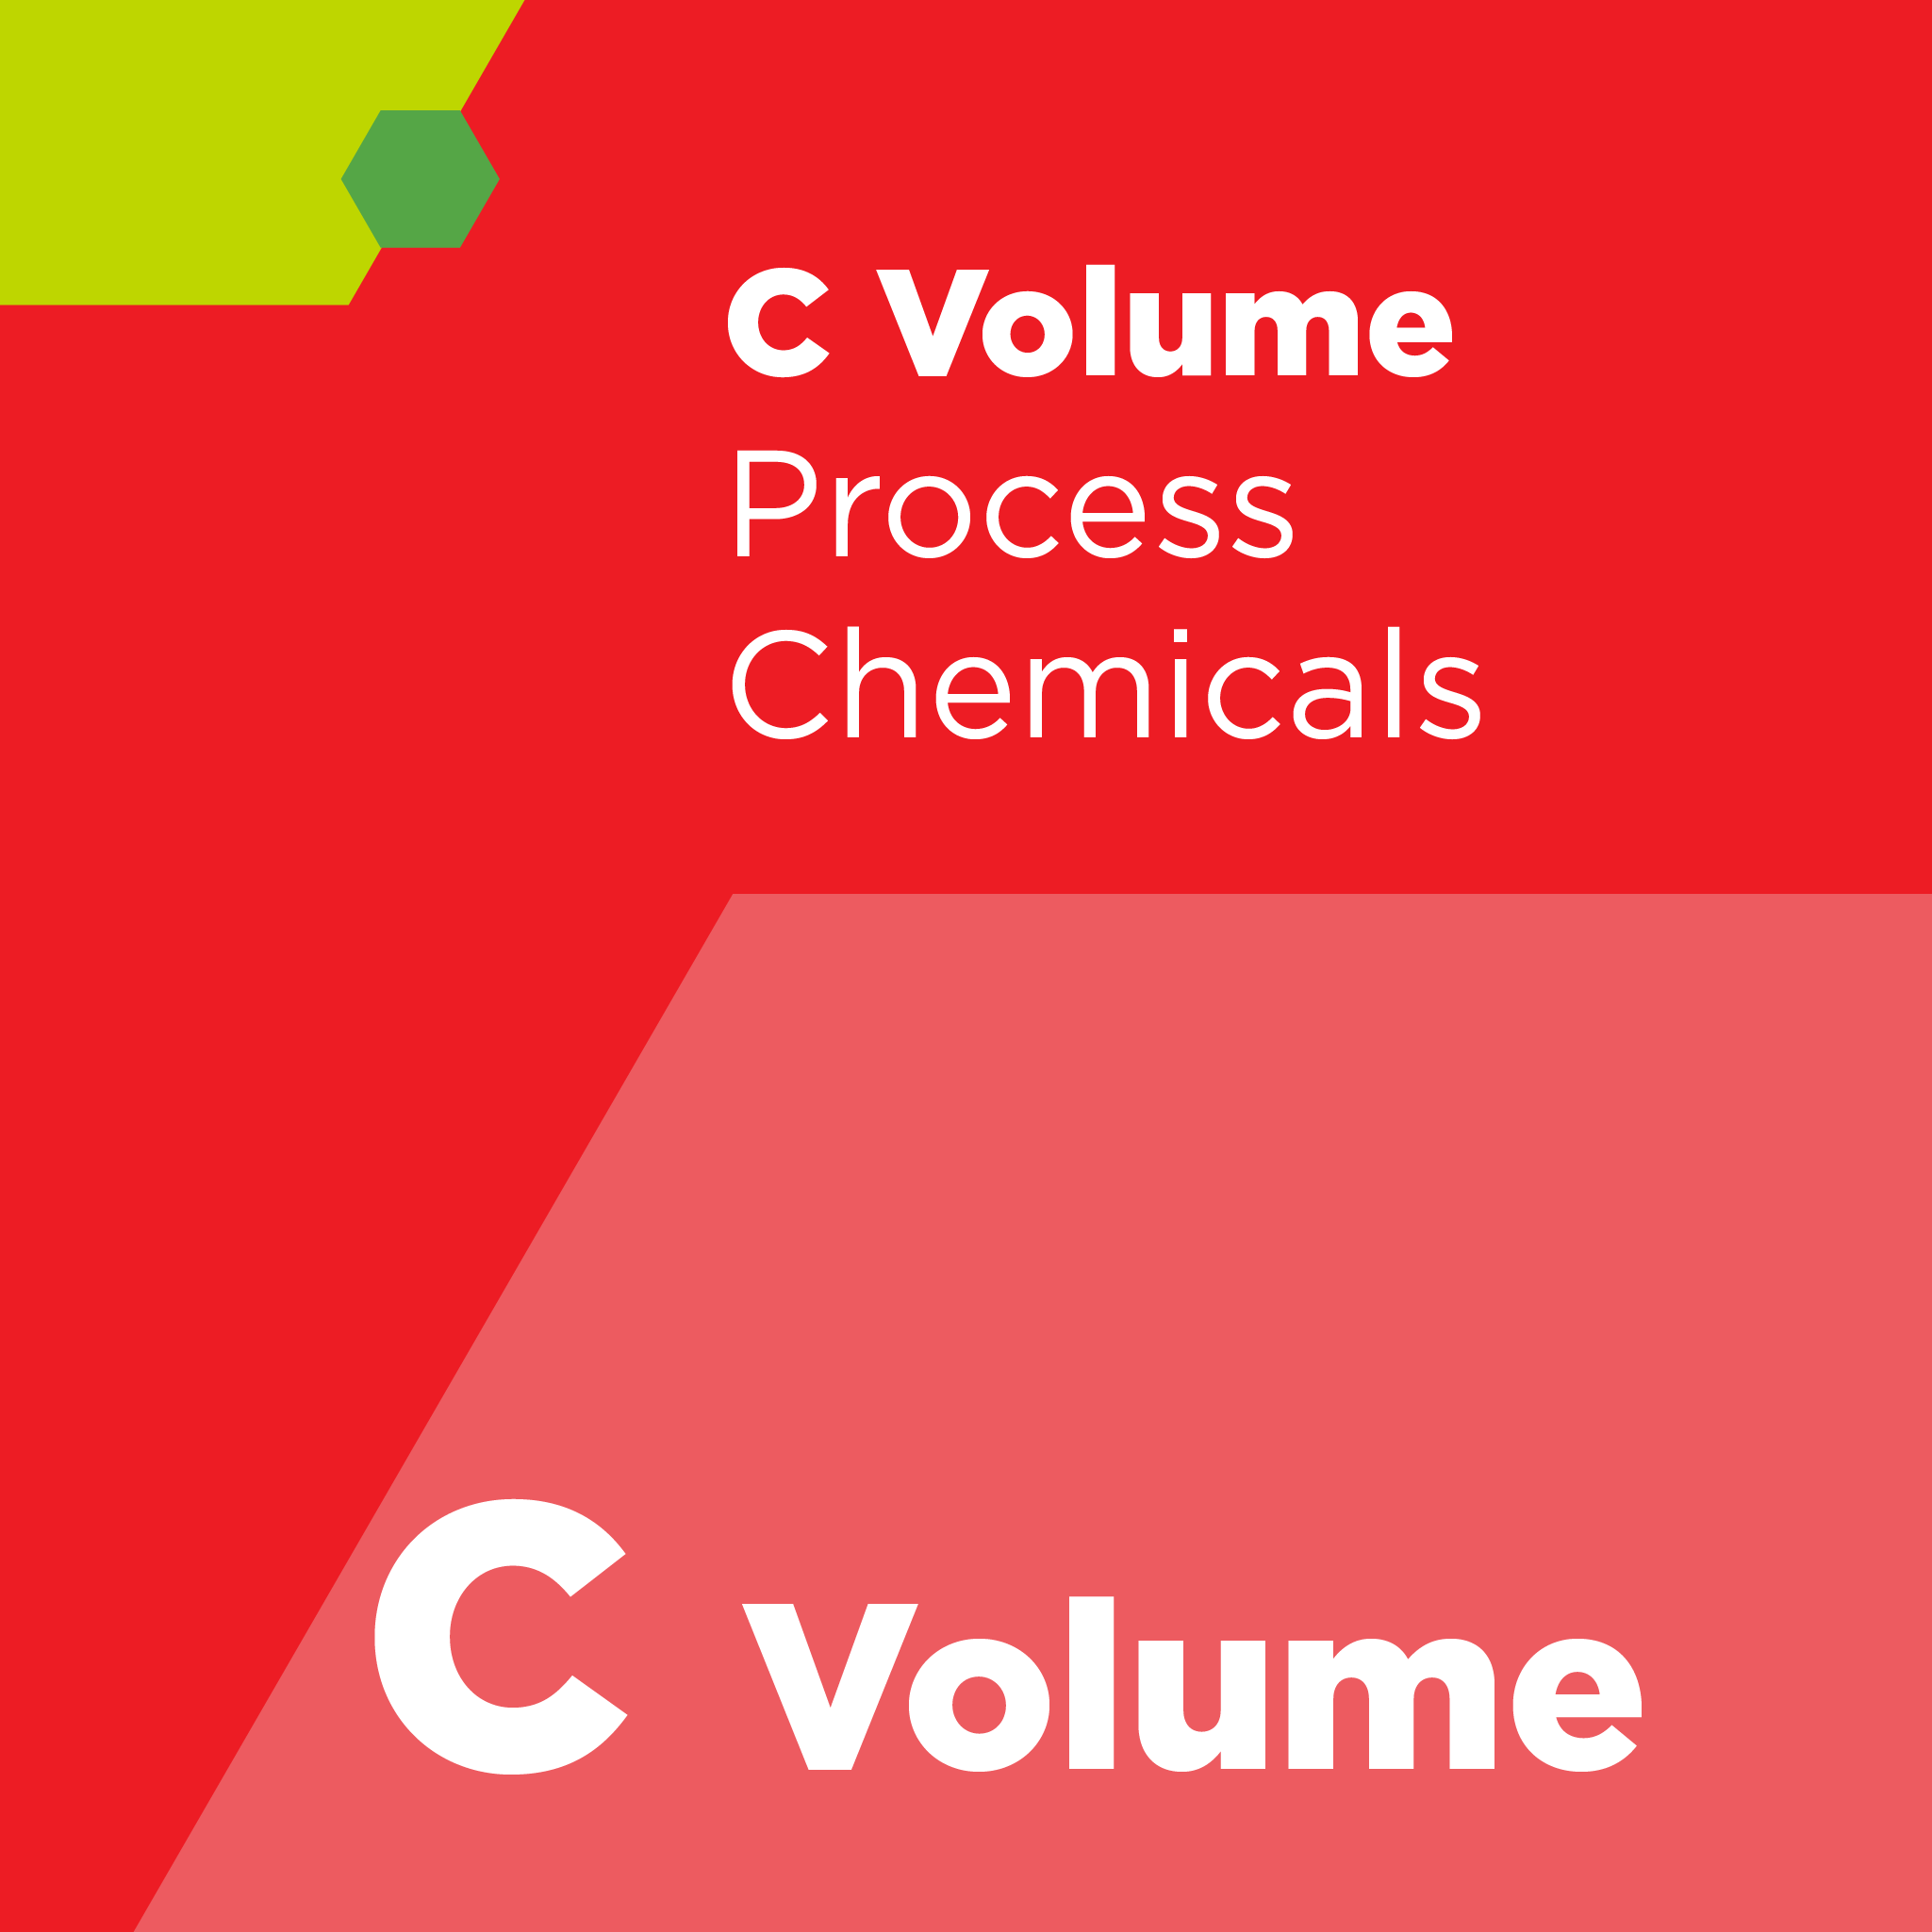 C06300 - SEMI C63 - Specification for Organosilicate Precursors Used in Low K CVD Processes